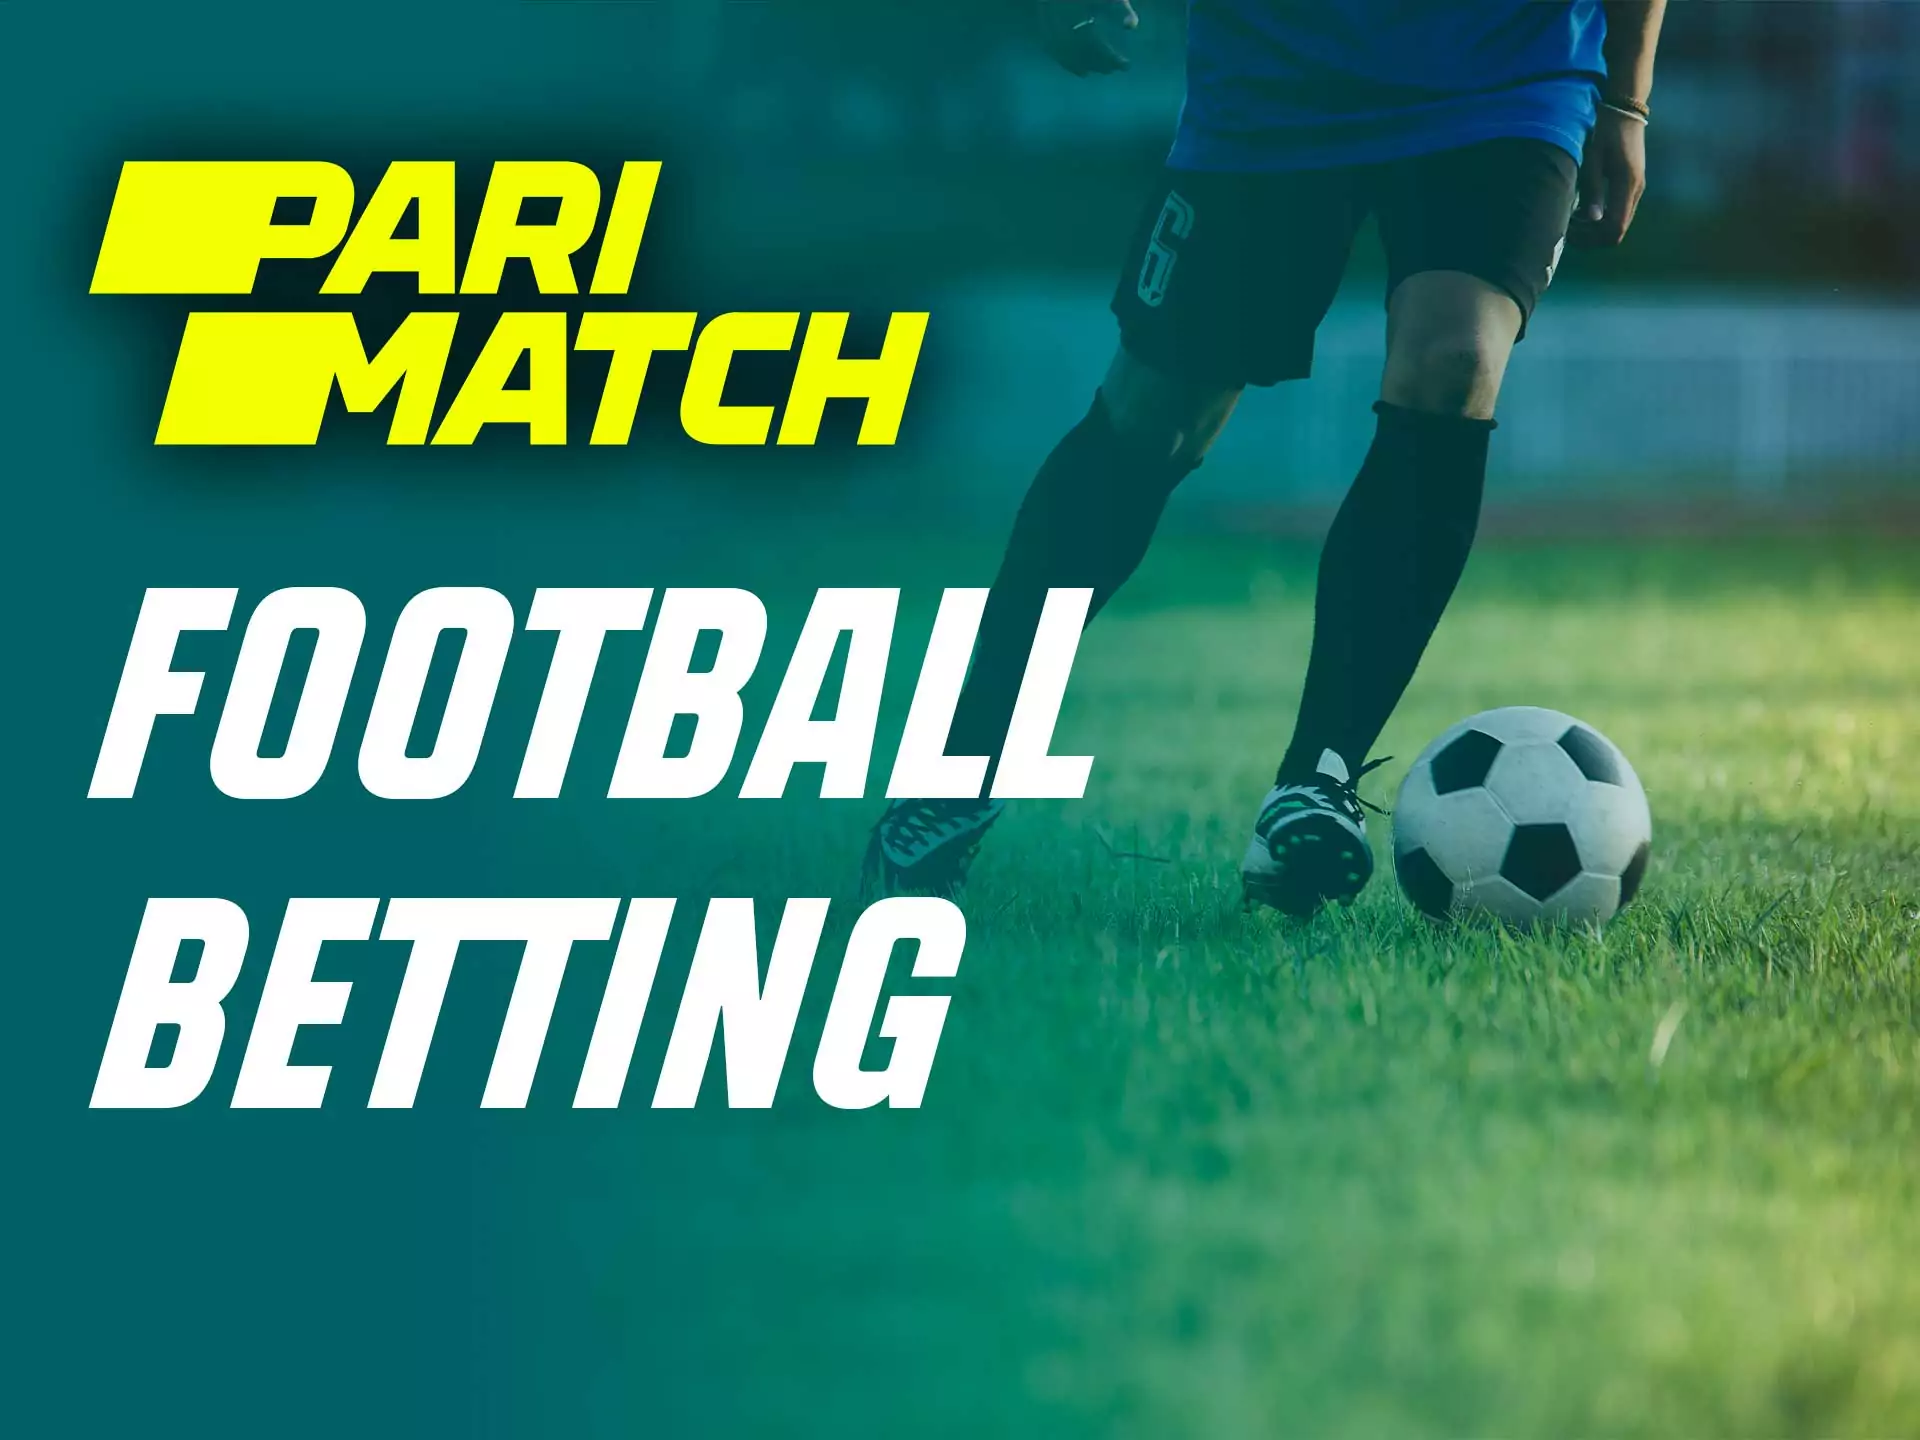 Choose your favorite football team and bet on it at Parimatch.